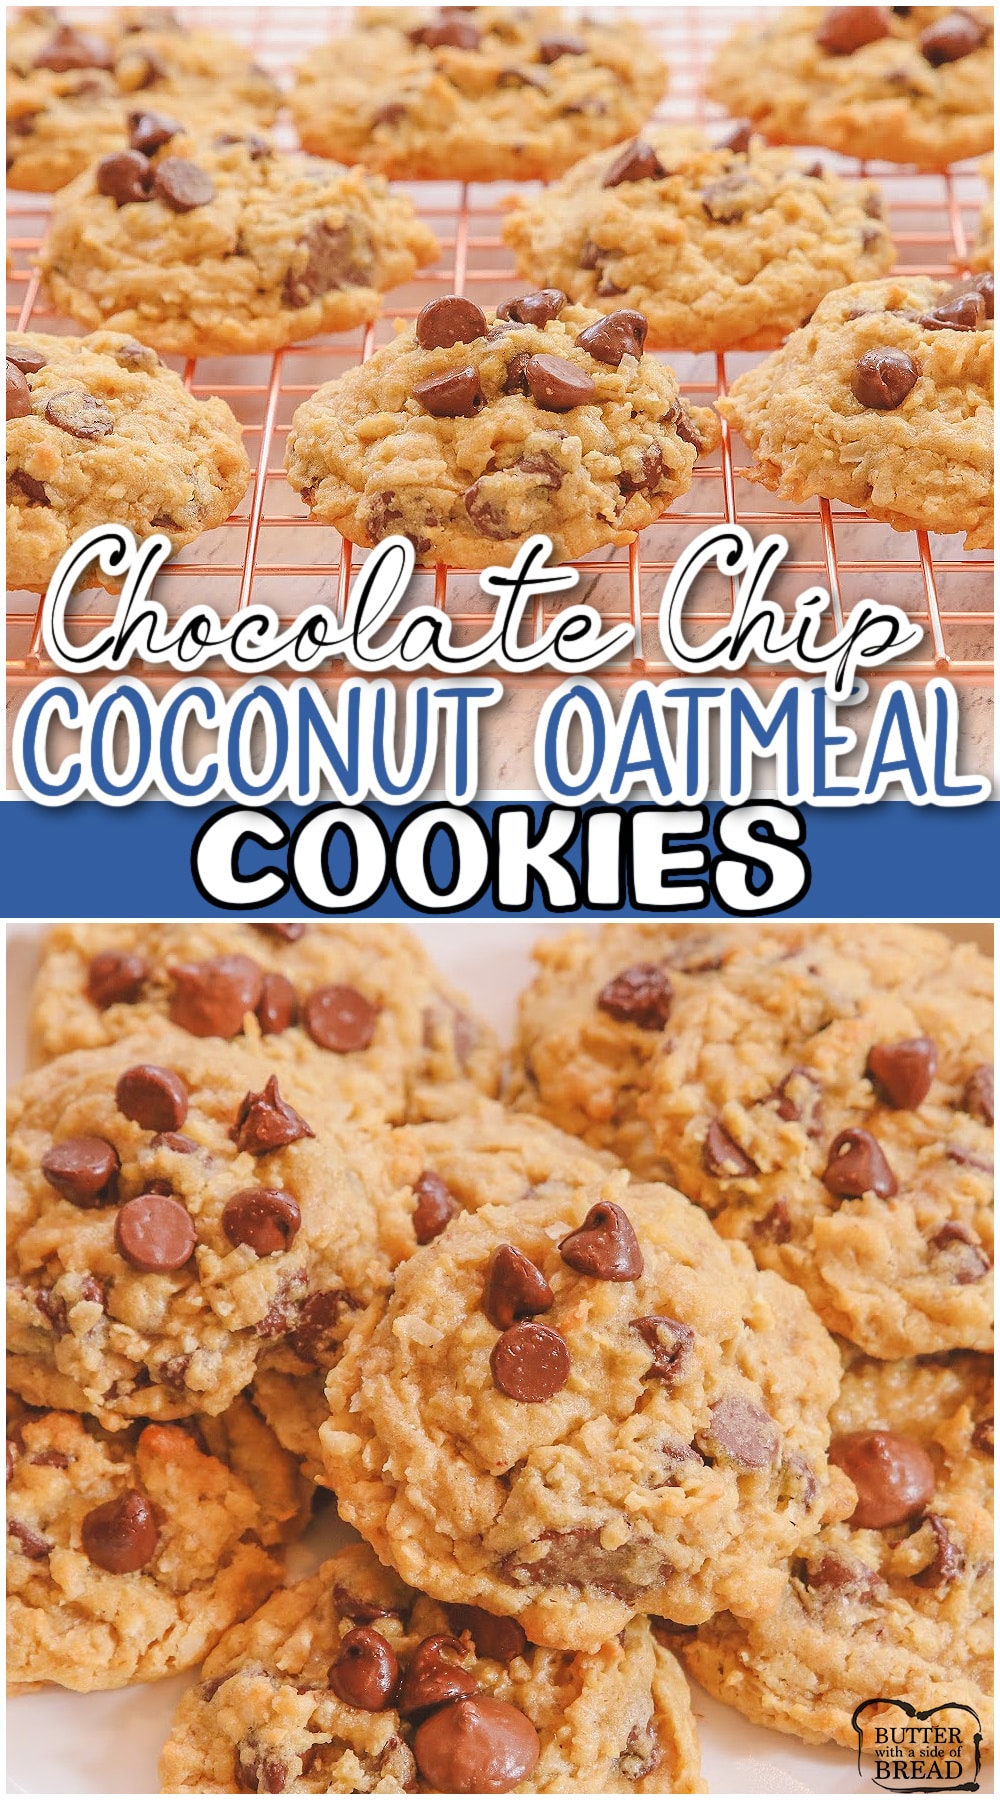 Chocolate Chip Coconut Oatmeal Cookies are loaded with sweet coconut, chocolate chips & oats! Delightful oatmeal chocolate chip cookie recipe with the addition of coconut for great chewy texture!